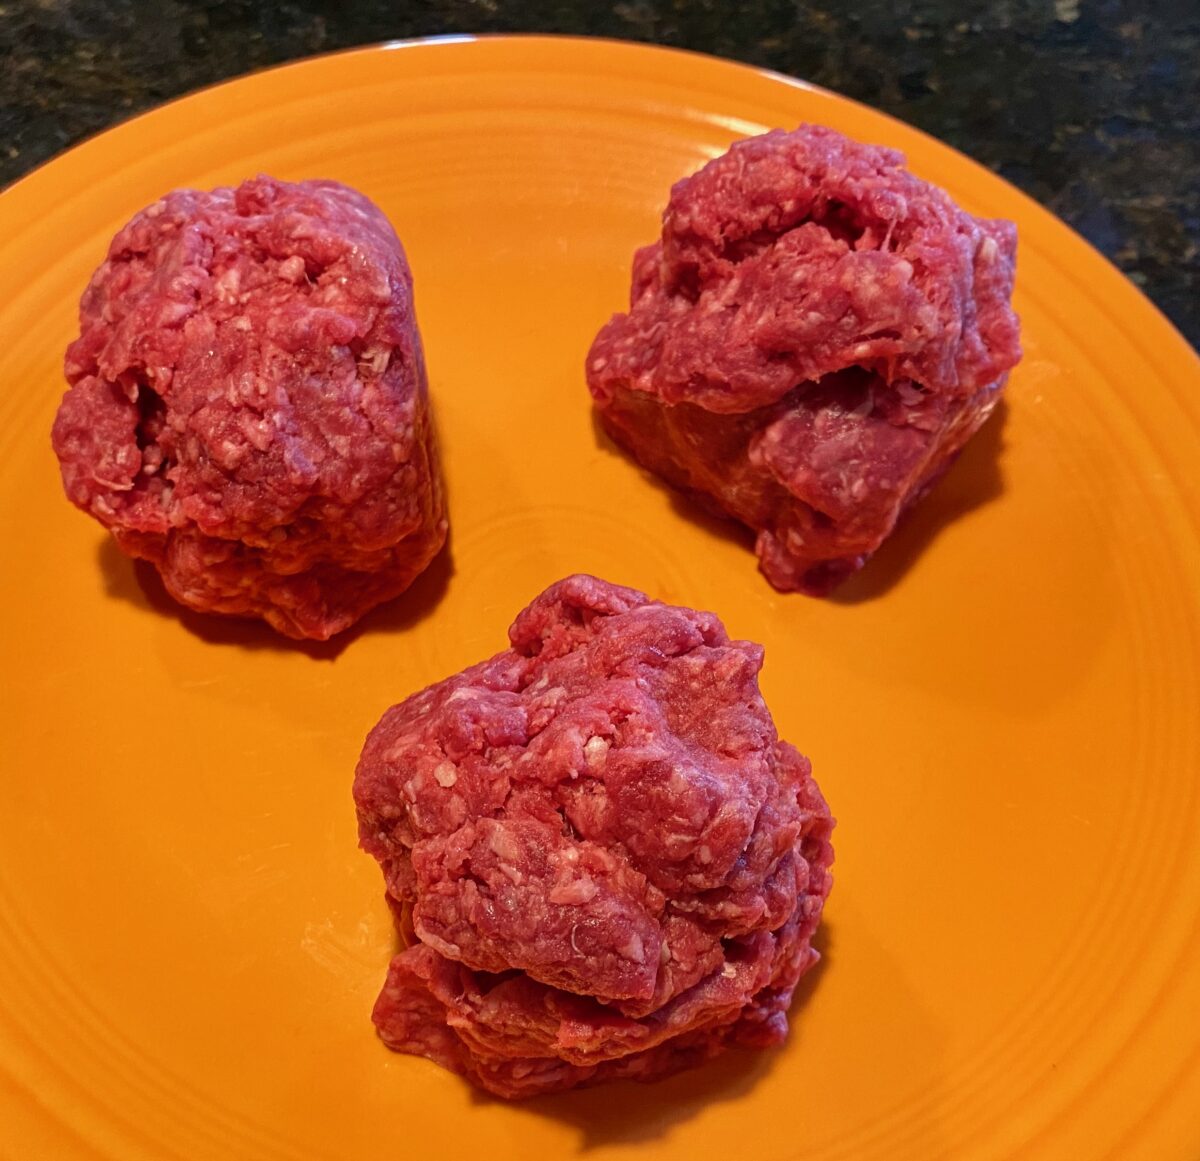 Three loosely formed balls of ground beef, ready to be placed onto a hot cast-iron griddle for making smash burgers.